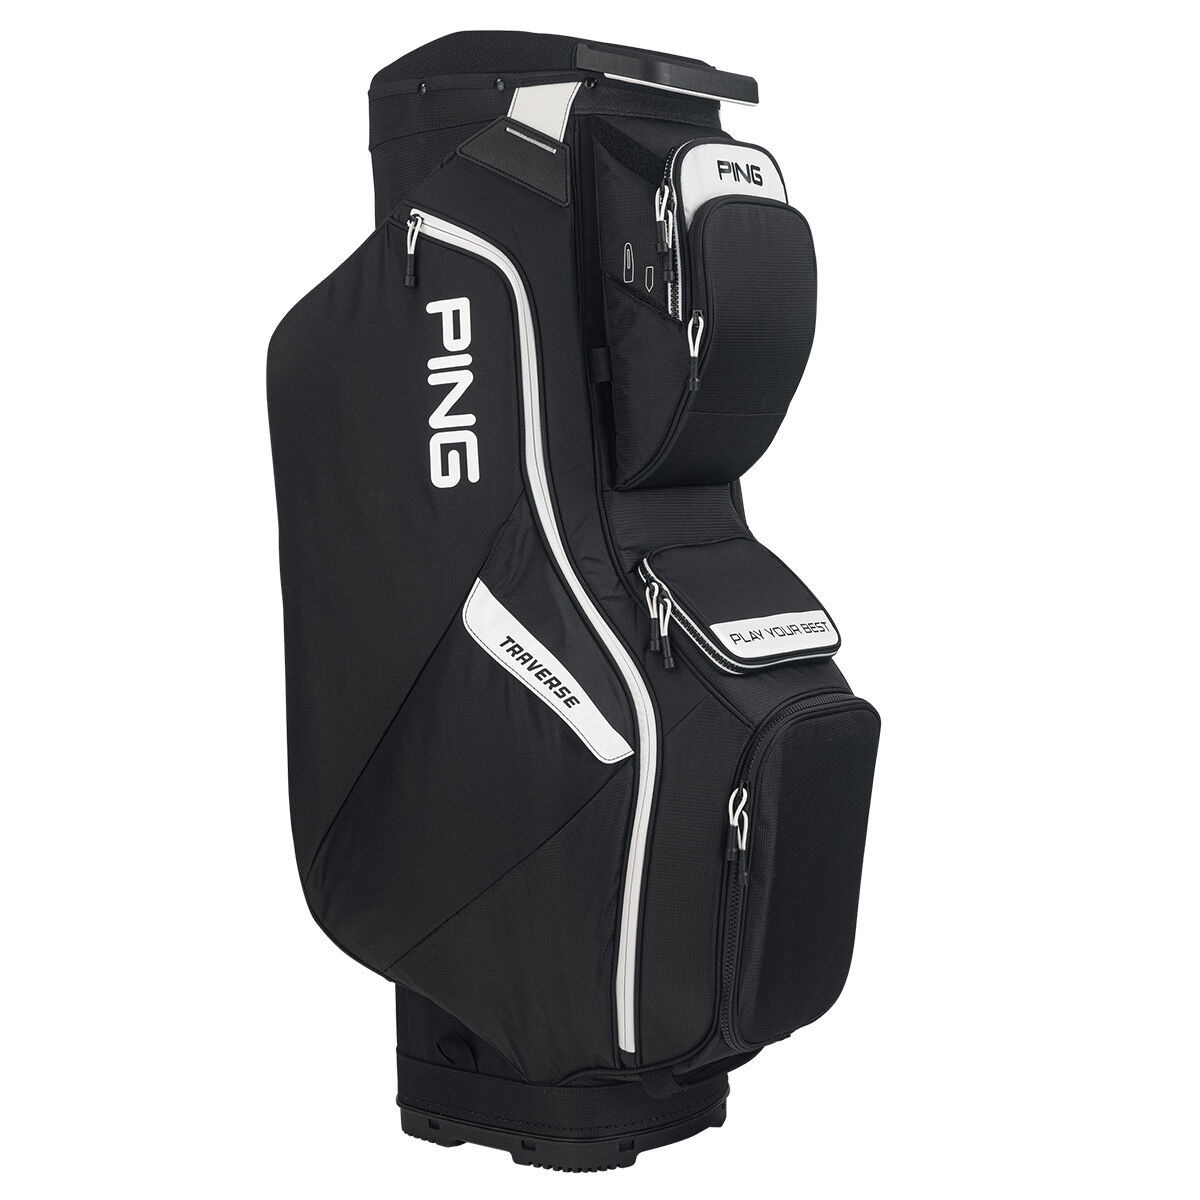 Ping Black and White Lightweight Traverse Golf Cart Bag 2022 | American Golf, One Size von Ping